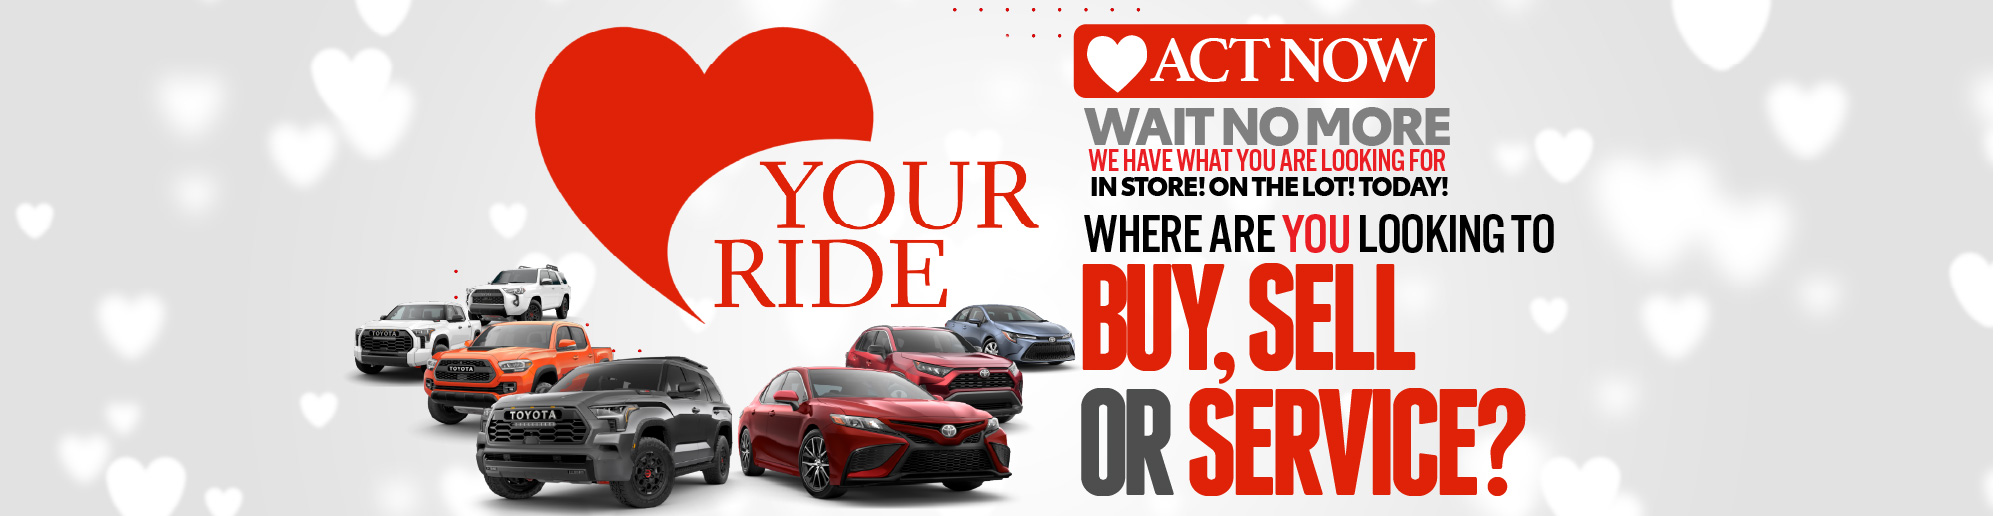 Where are you Looking to BUY SELL OR SERVICE? Toyota of McKinney is the RIGHT CHOICE!